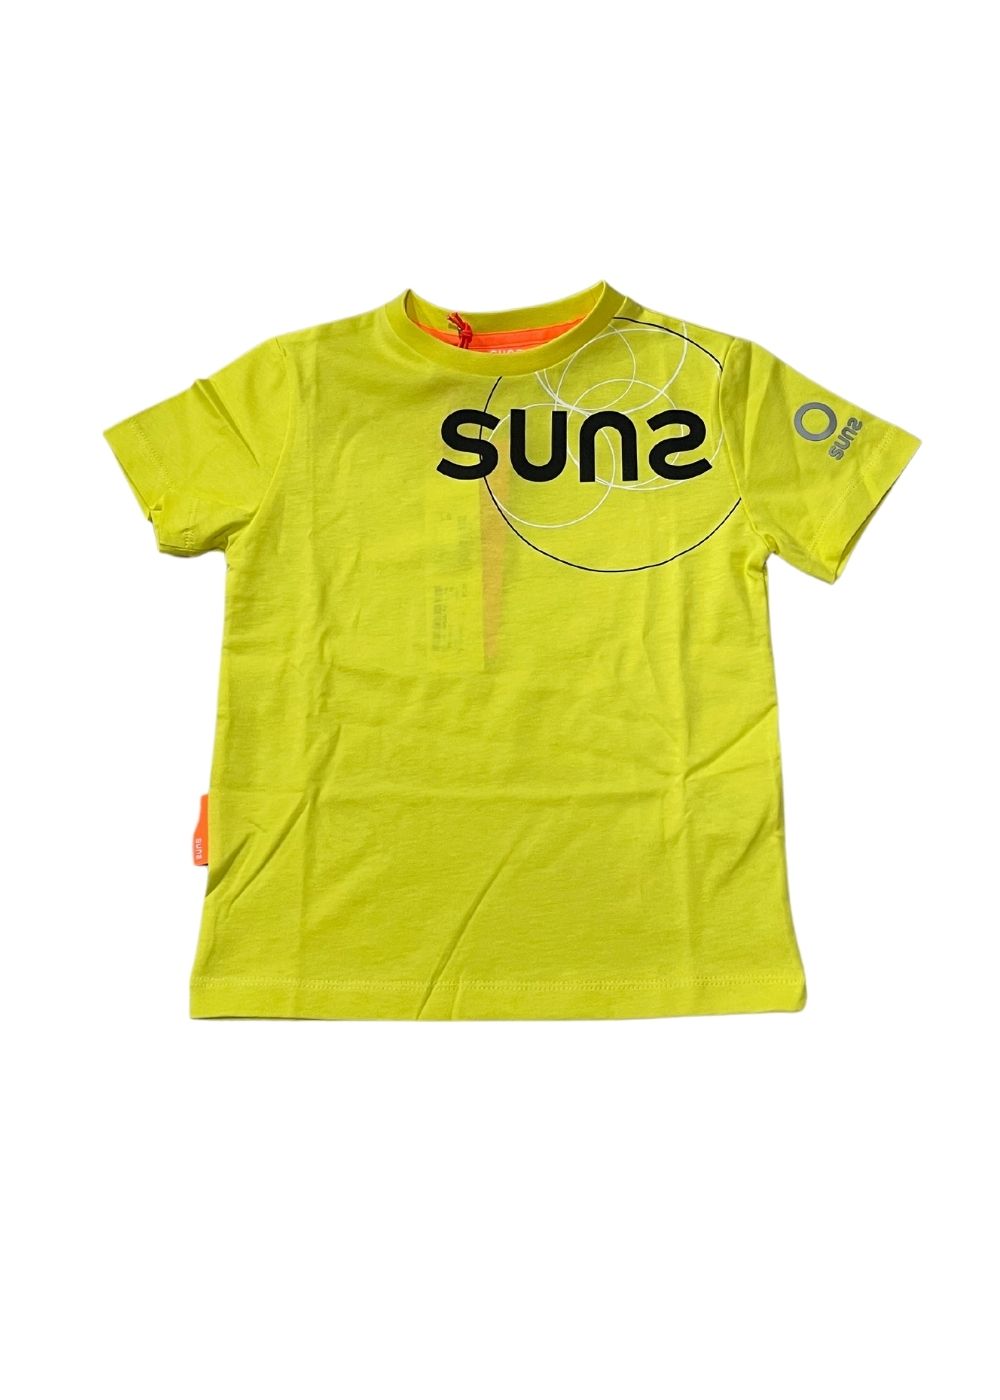 Featured image for “SUNS T-SHIRT LIME”